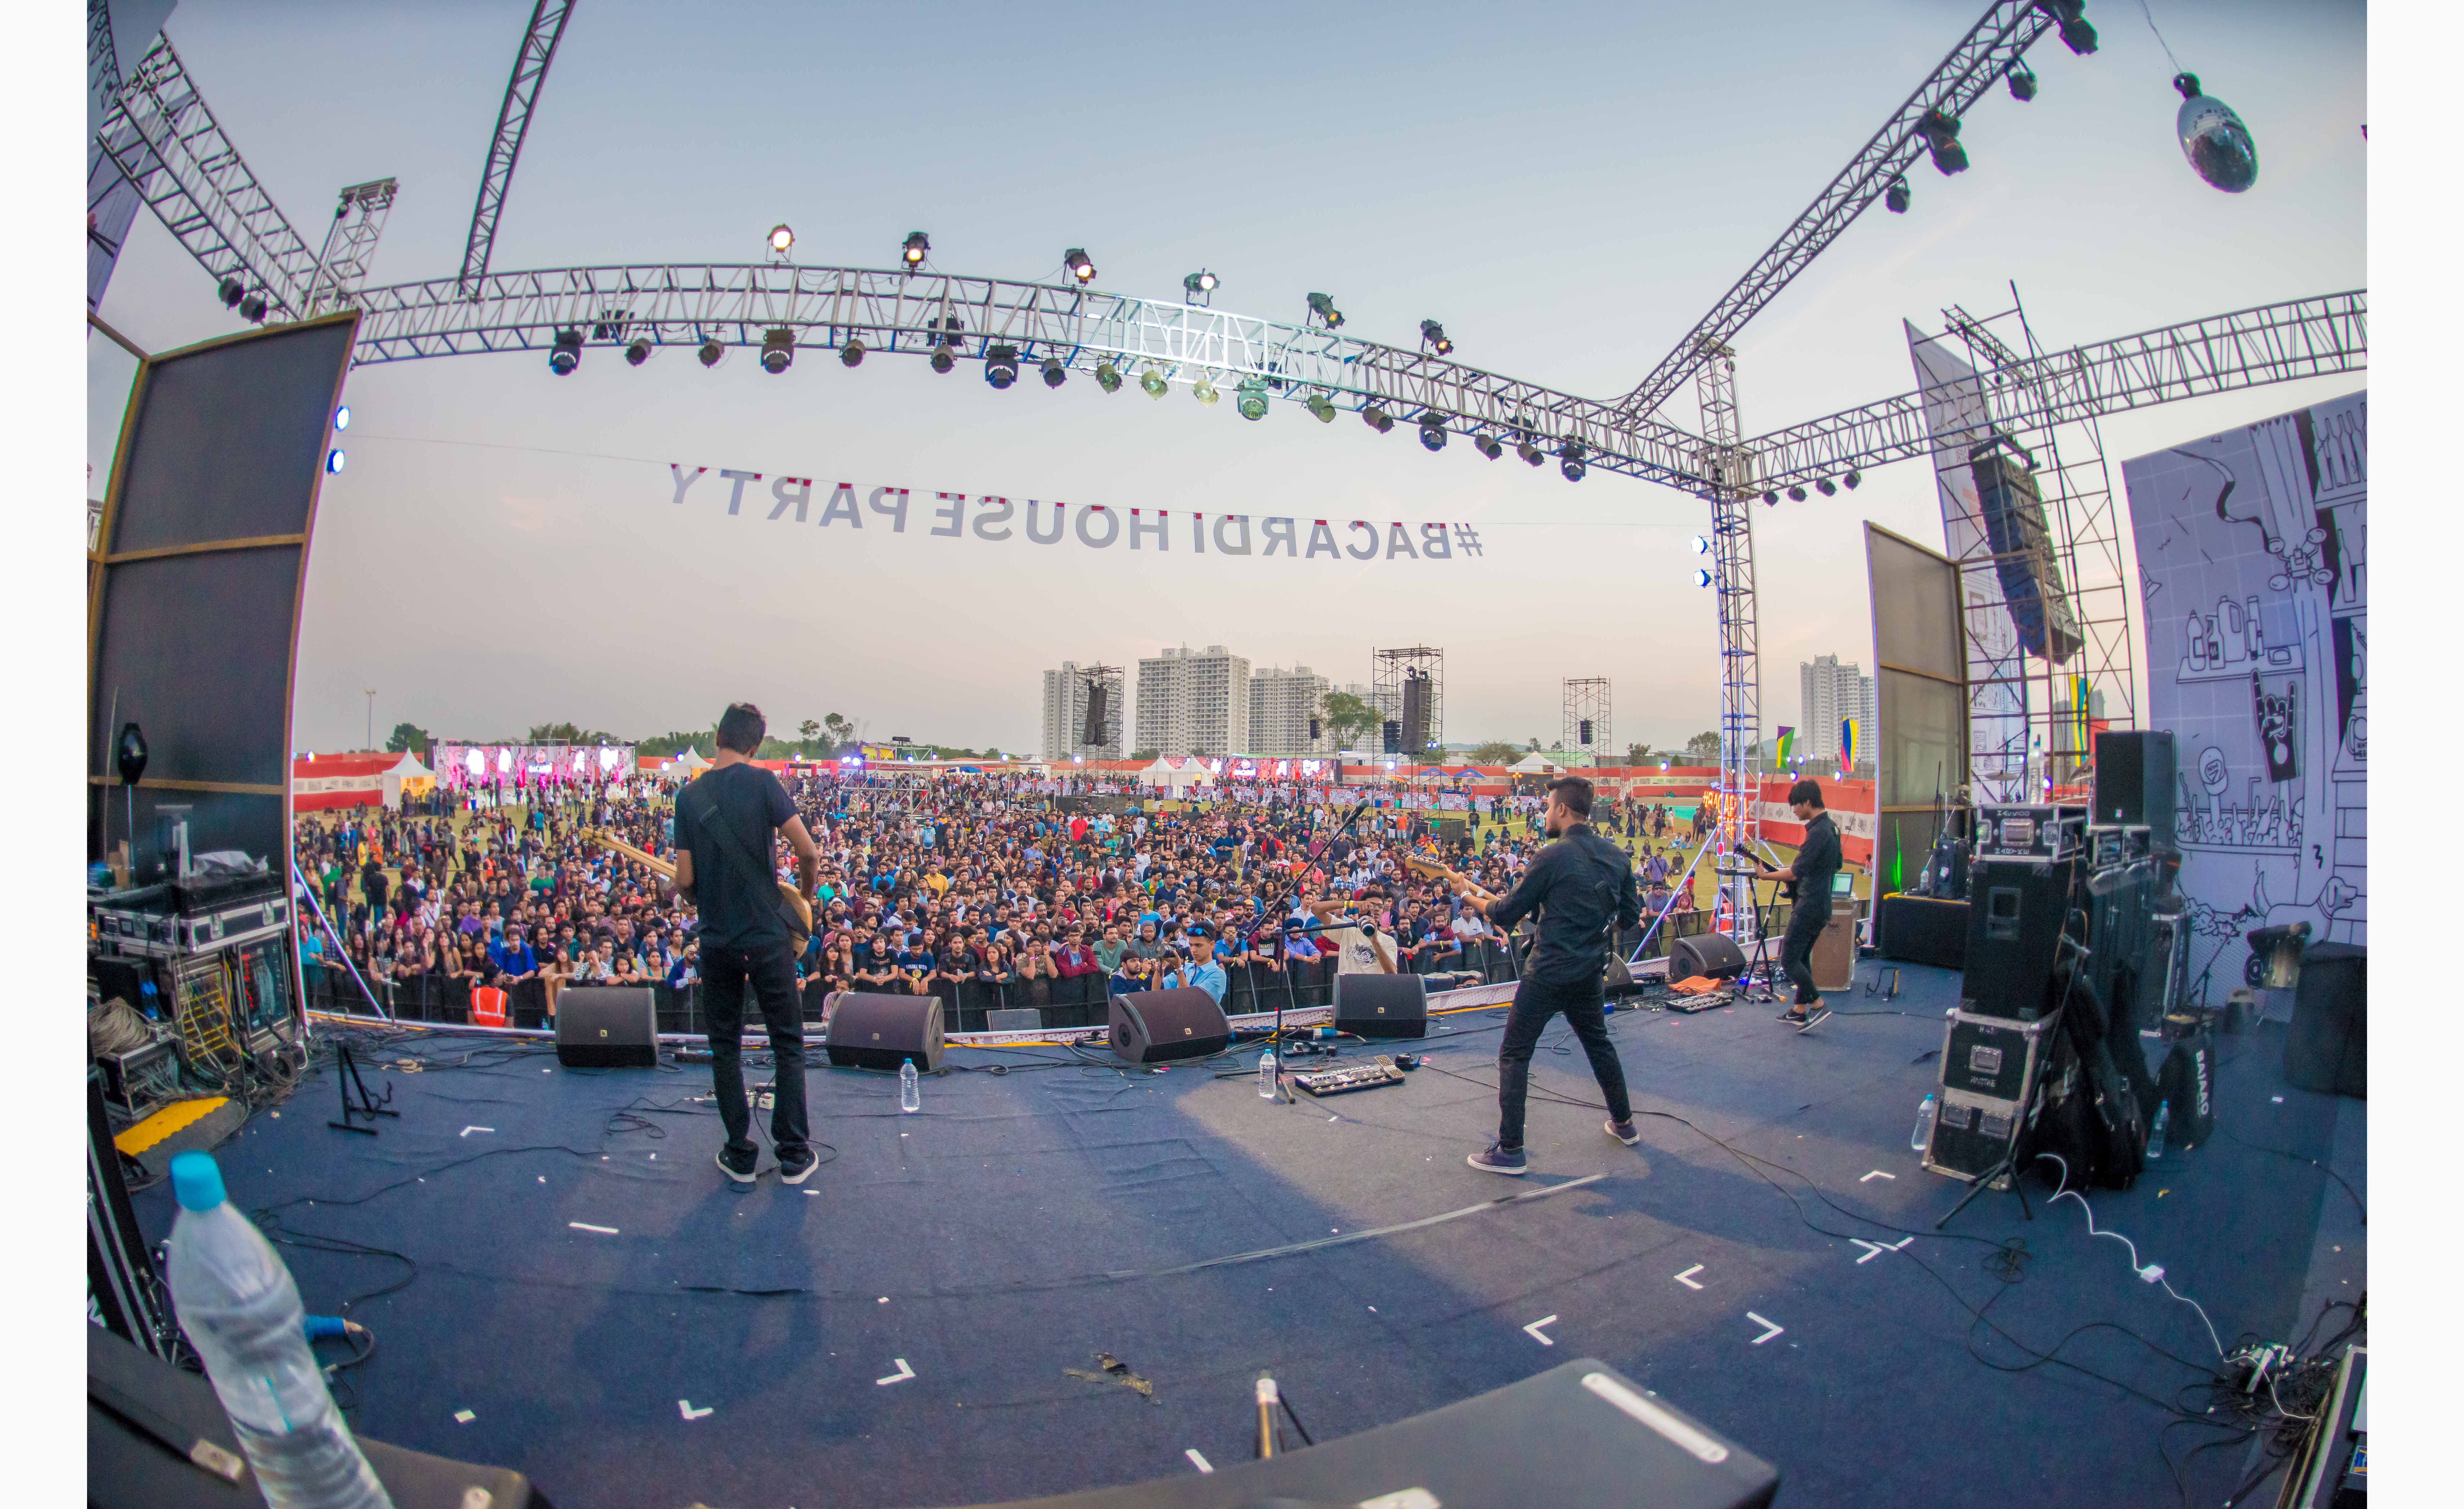 Dossers Urge performance on Day 2 of Bacardi NH7 Weekender Pune. Photo Credit - Clique Photography